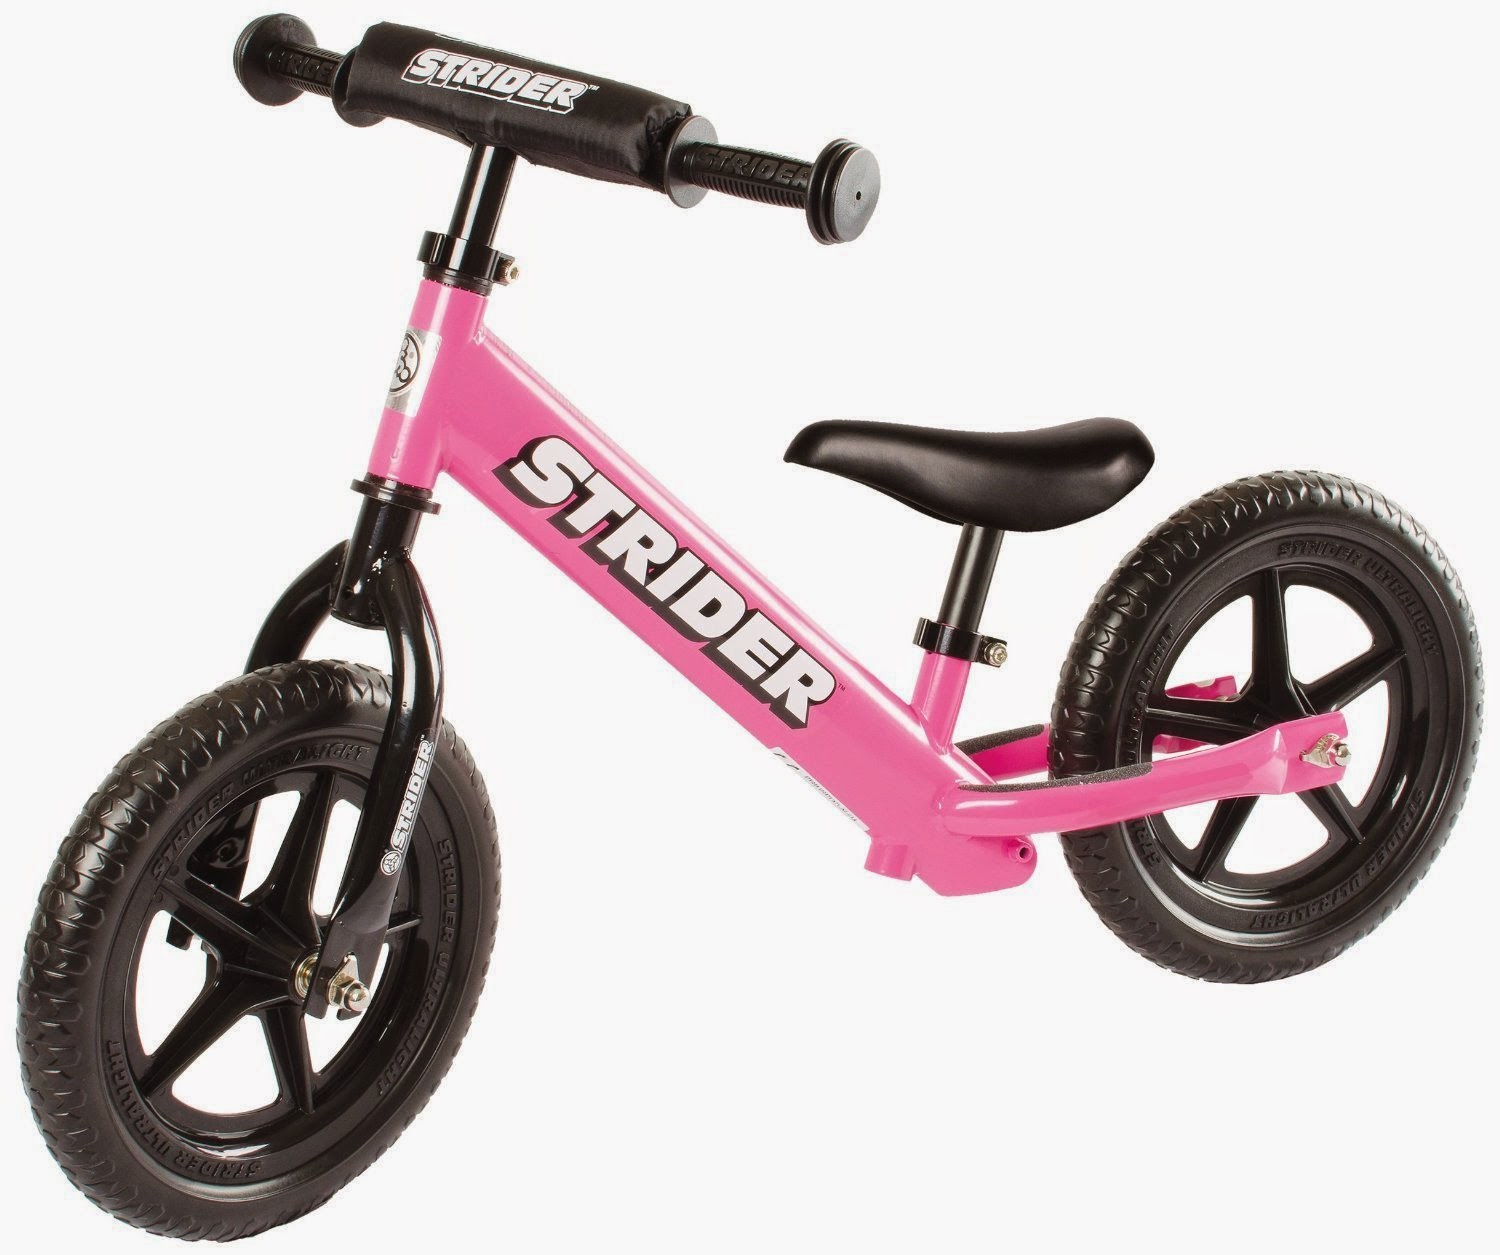 Strider 12 Sport No-Pedal Balance Bike, pink, picture, image, review features and specifications